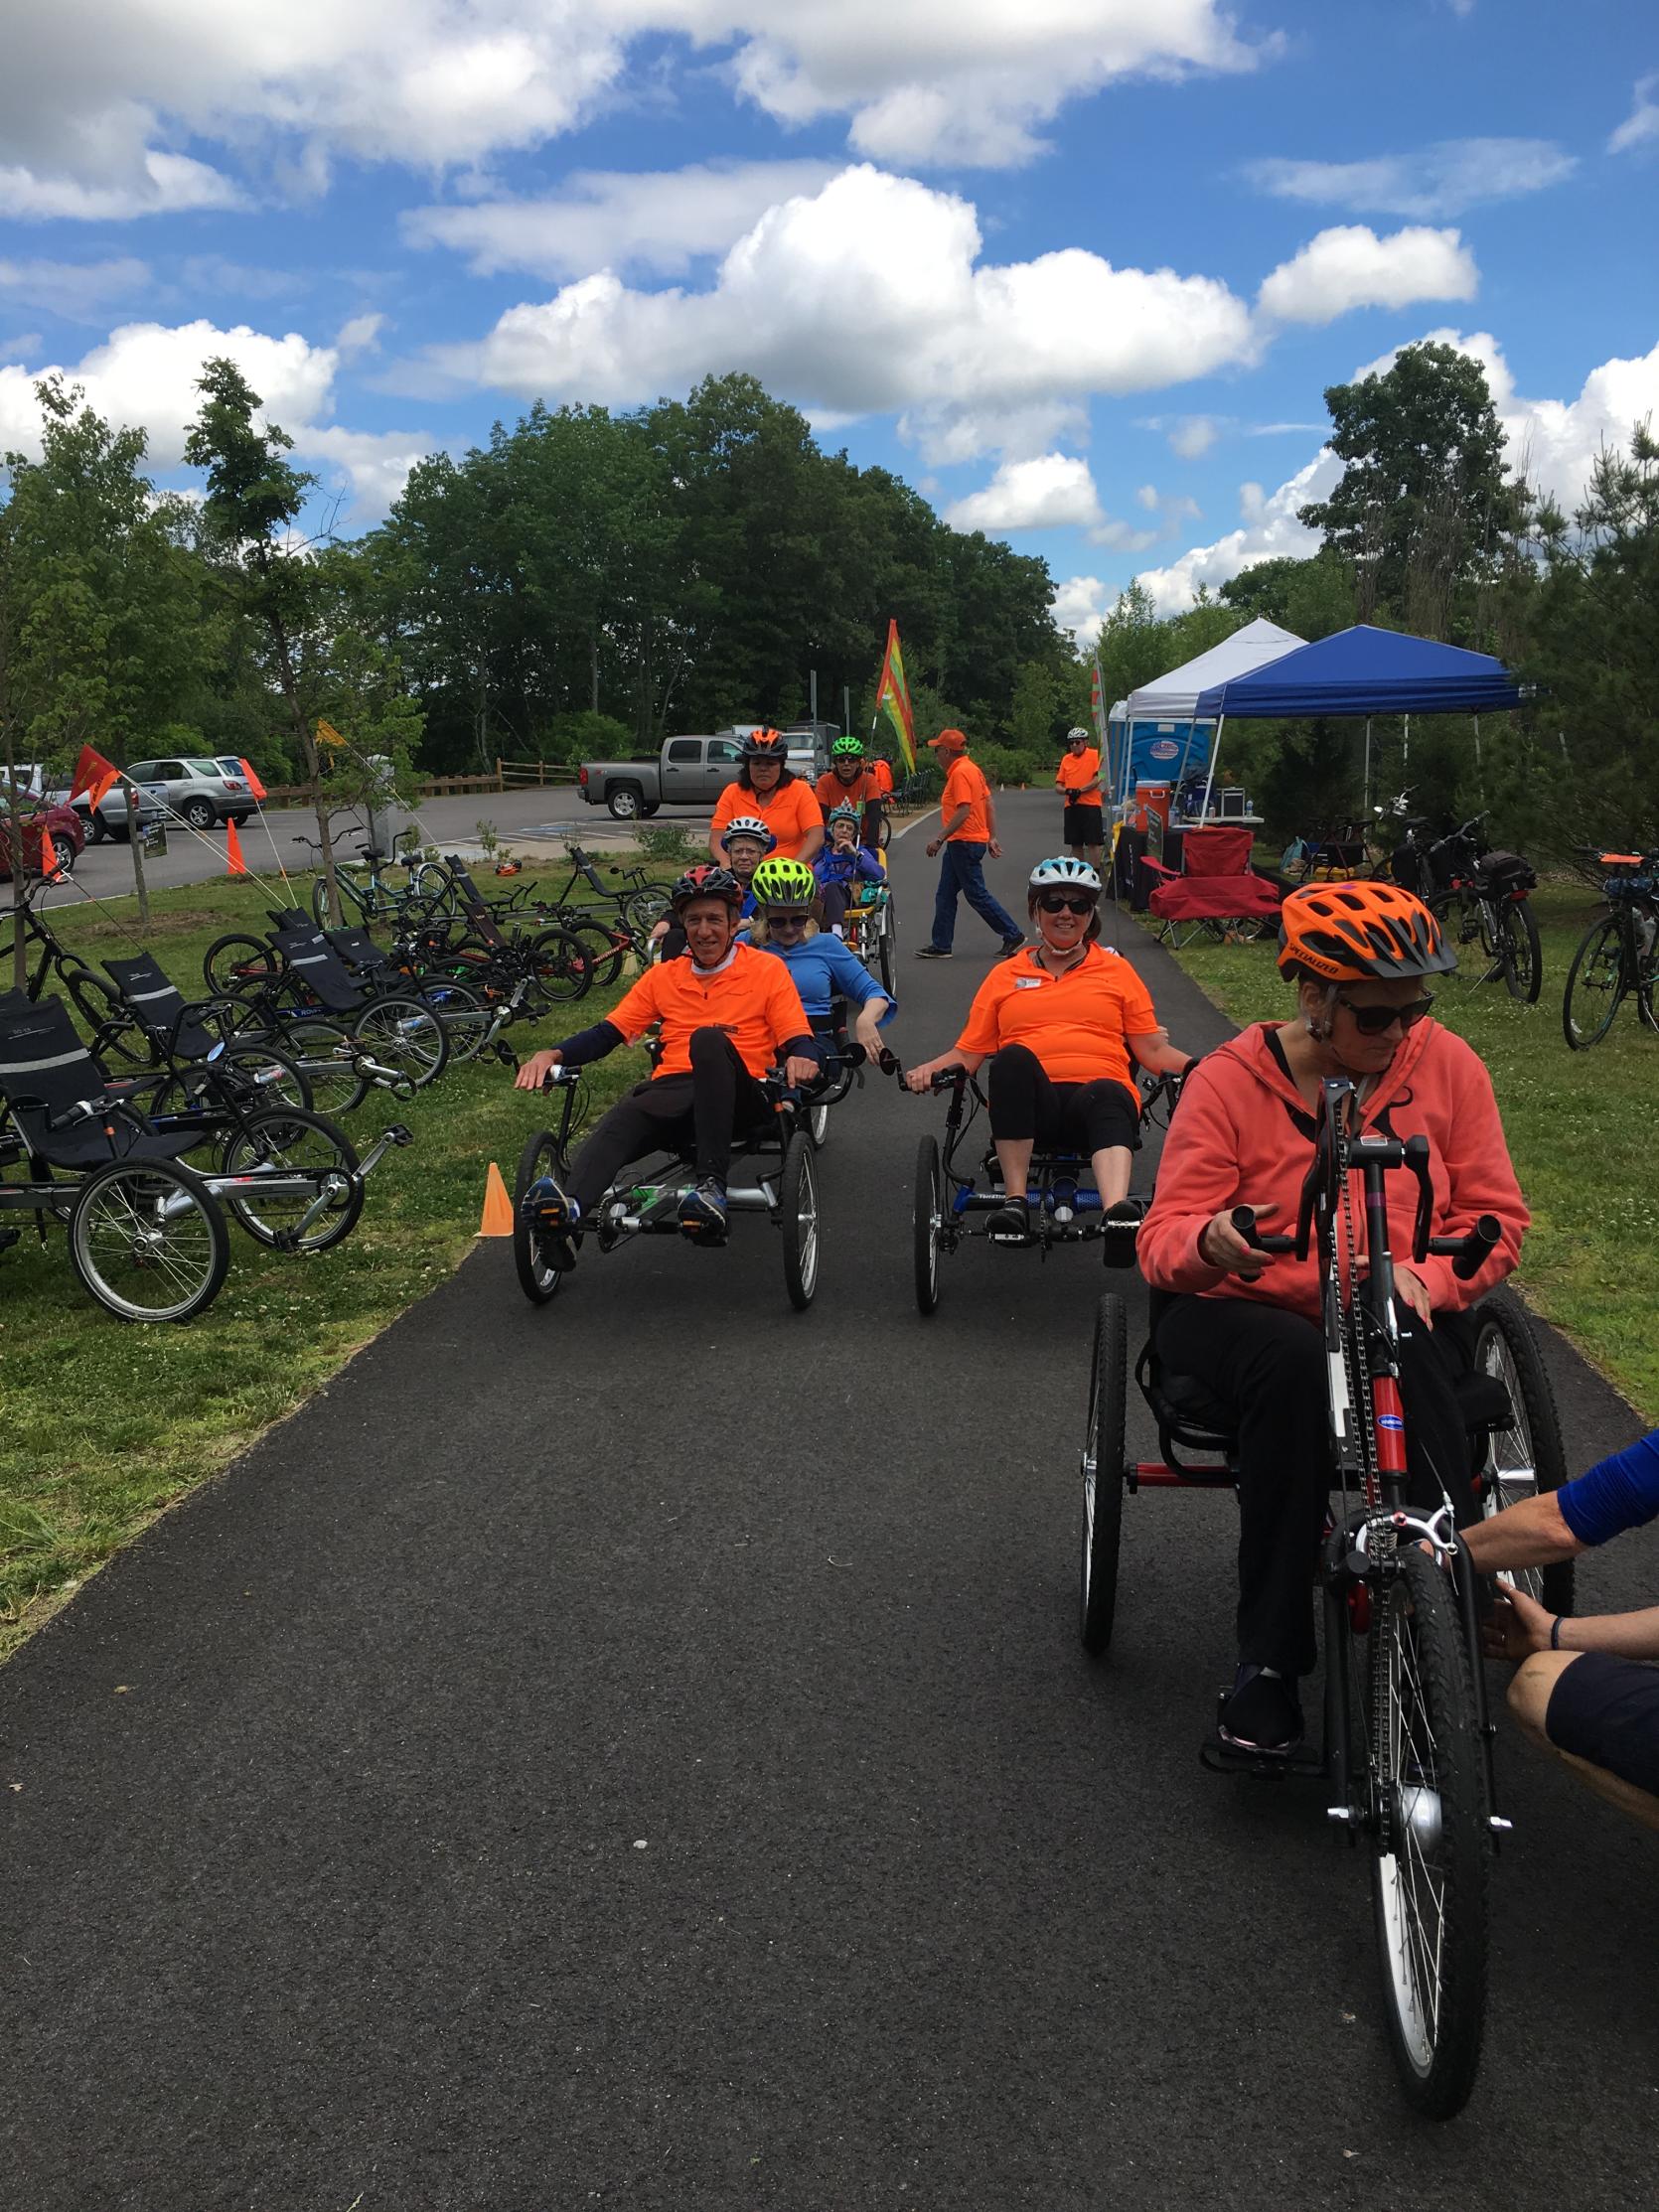 Cyclists on a bike path riding recumbent tandems, handcycles, and other adaptive cycles.